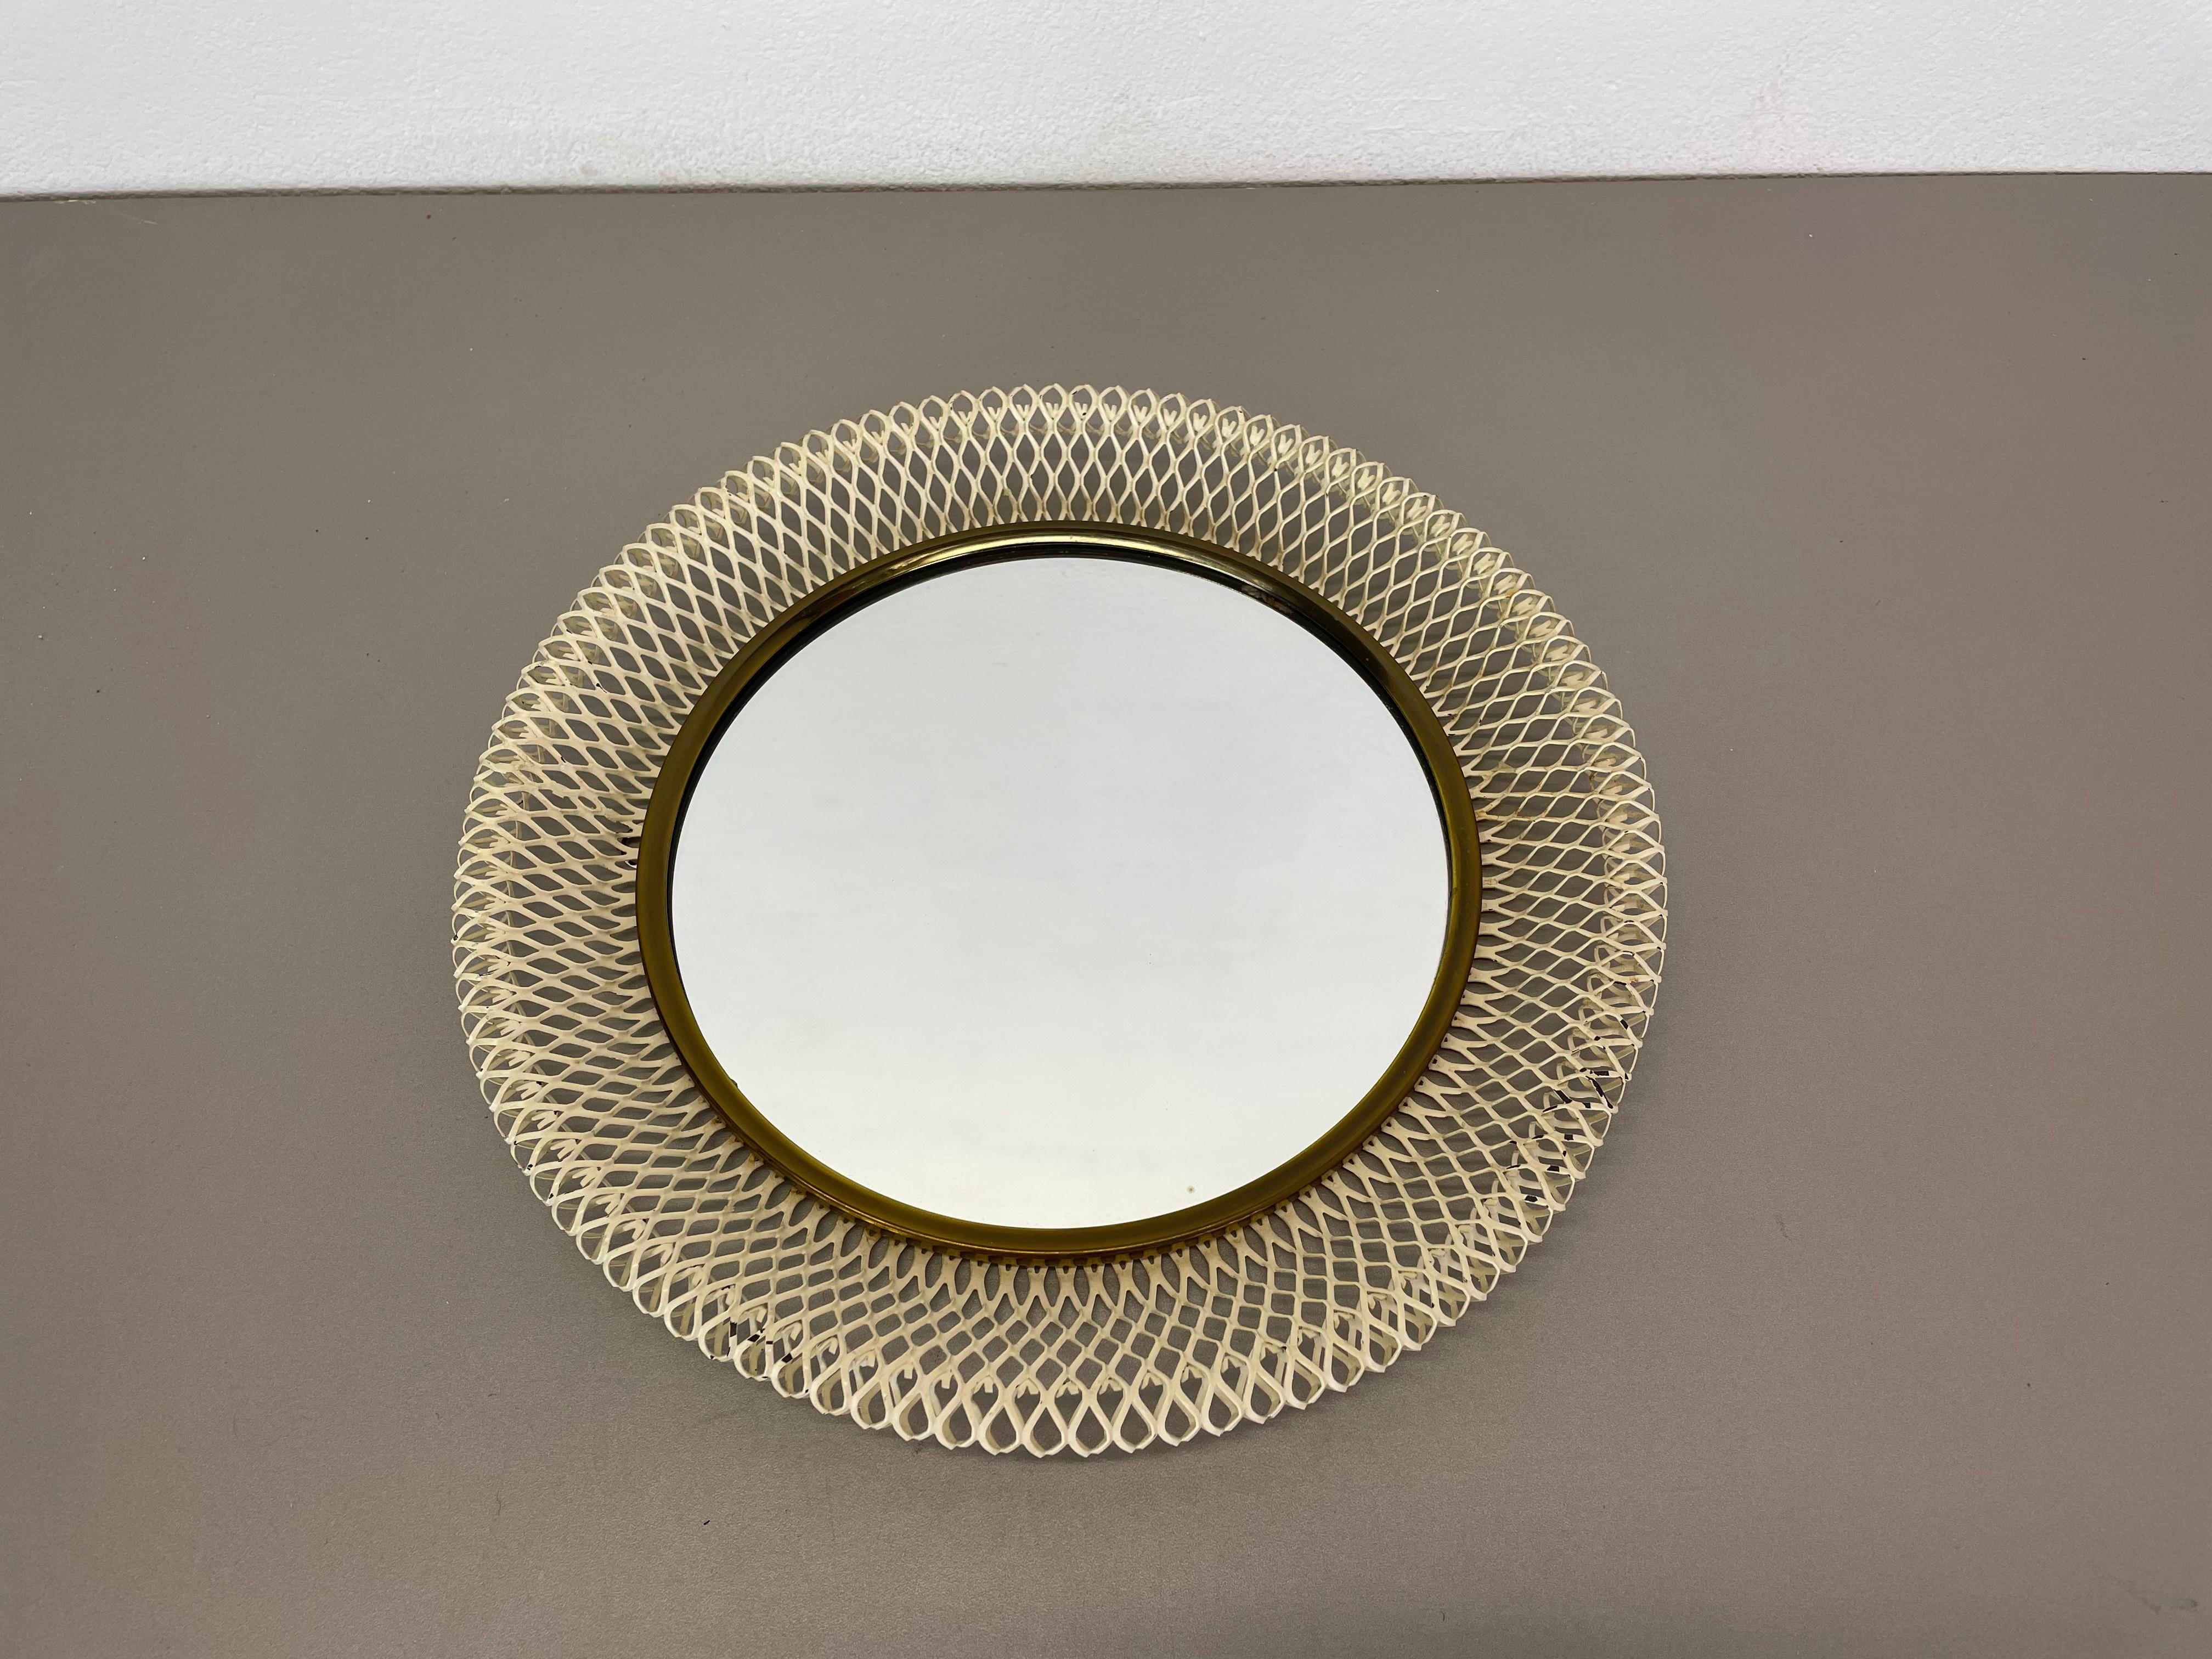 Article:

Wall mirror

Origin:

France

Design:

Remembers in design of Mategot

Age: 

1950s

This original vintage wall mirror was produced in the 1950s in France. it is made of solid metal with a metal grid perforation in white